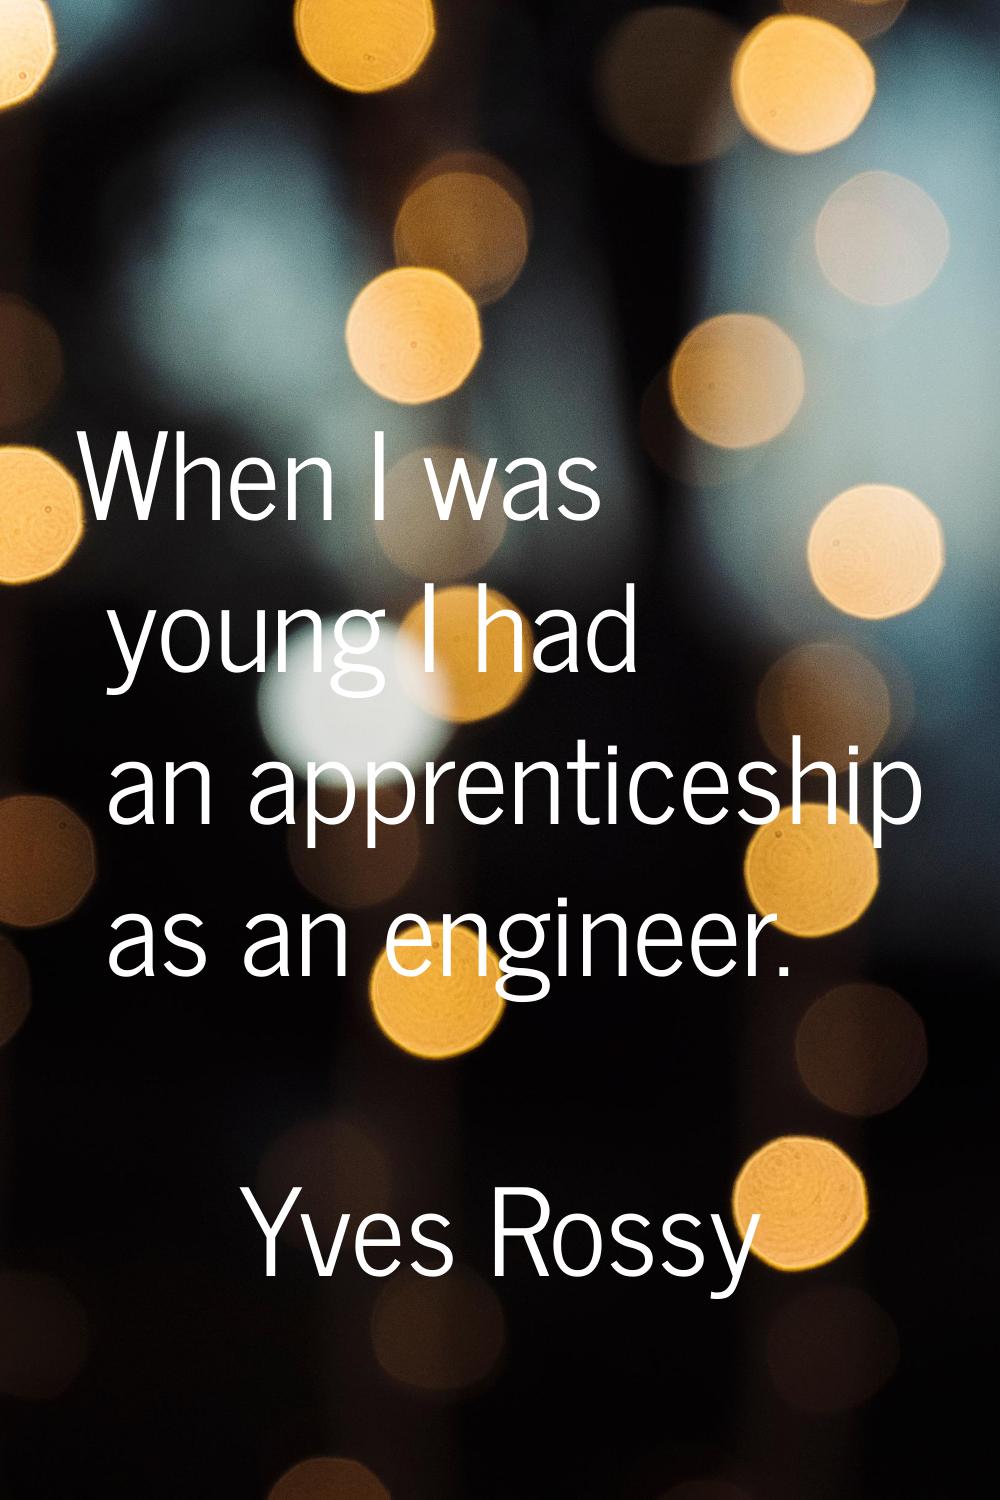 When I was young I had an apprenticeship as an engineer.